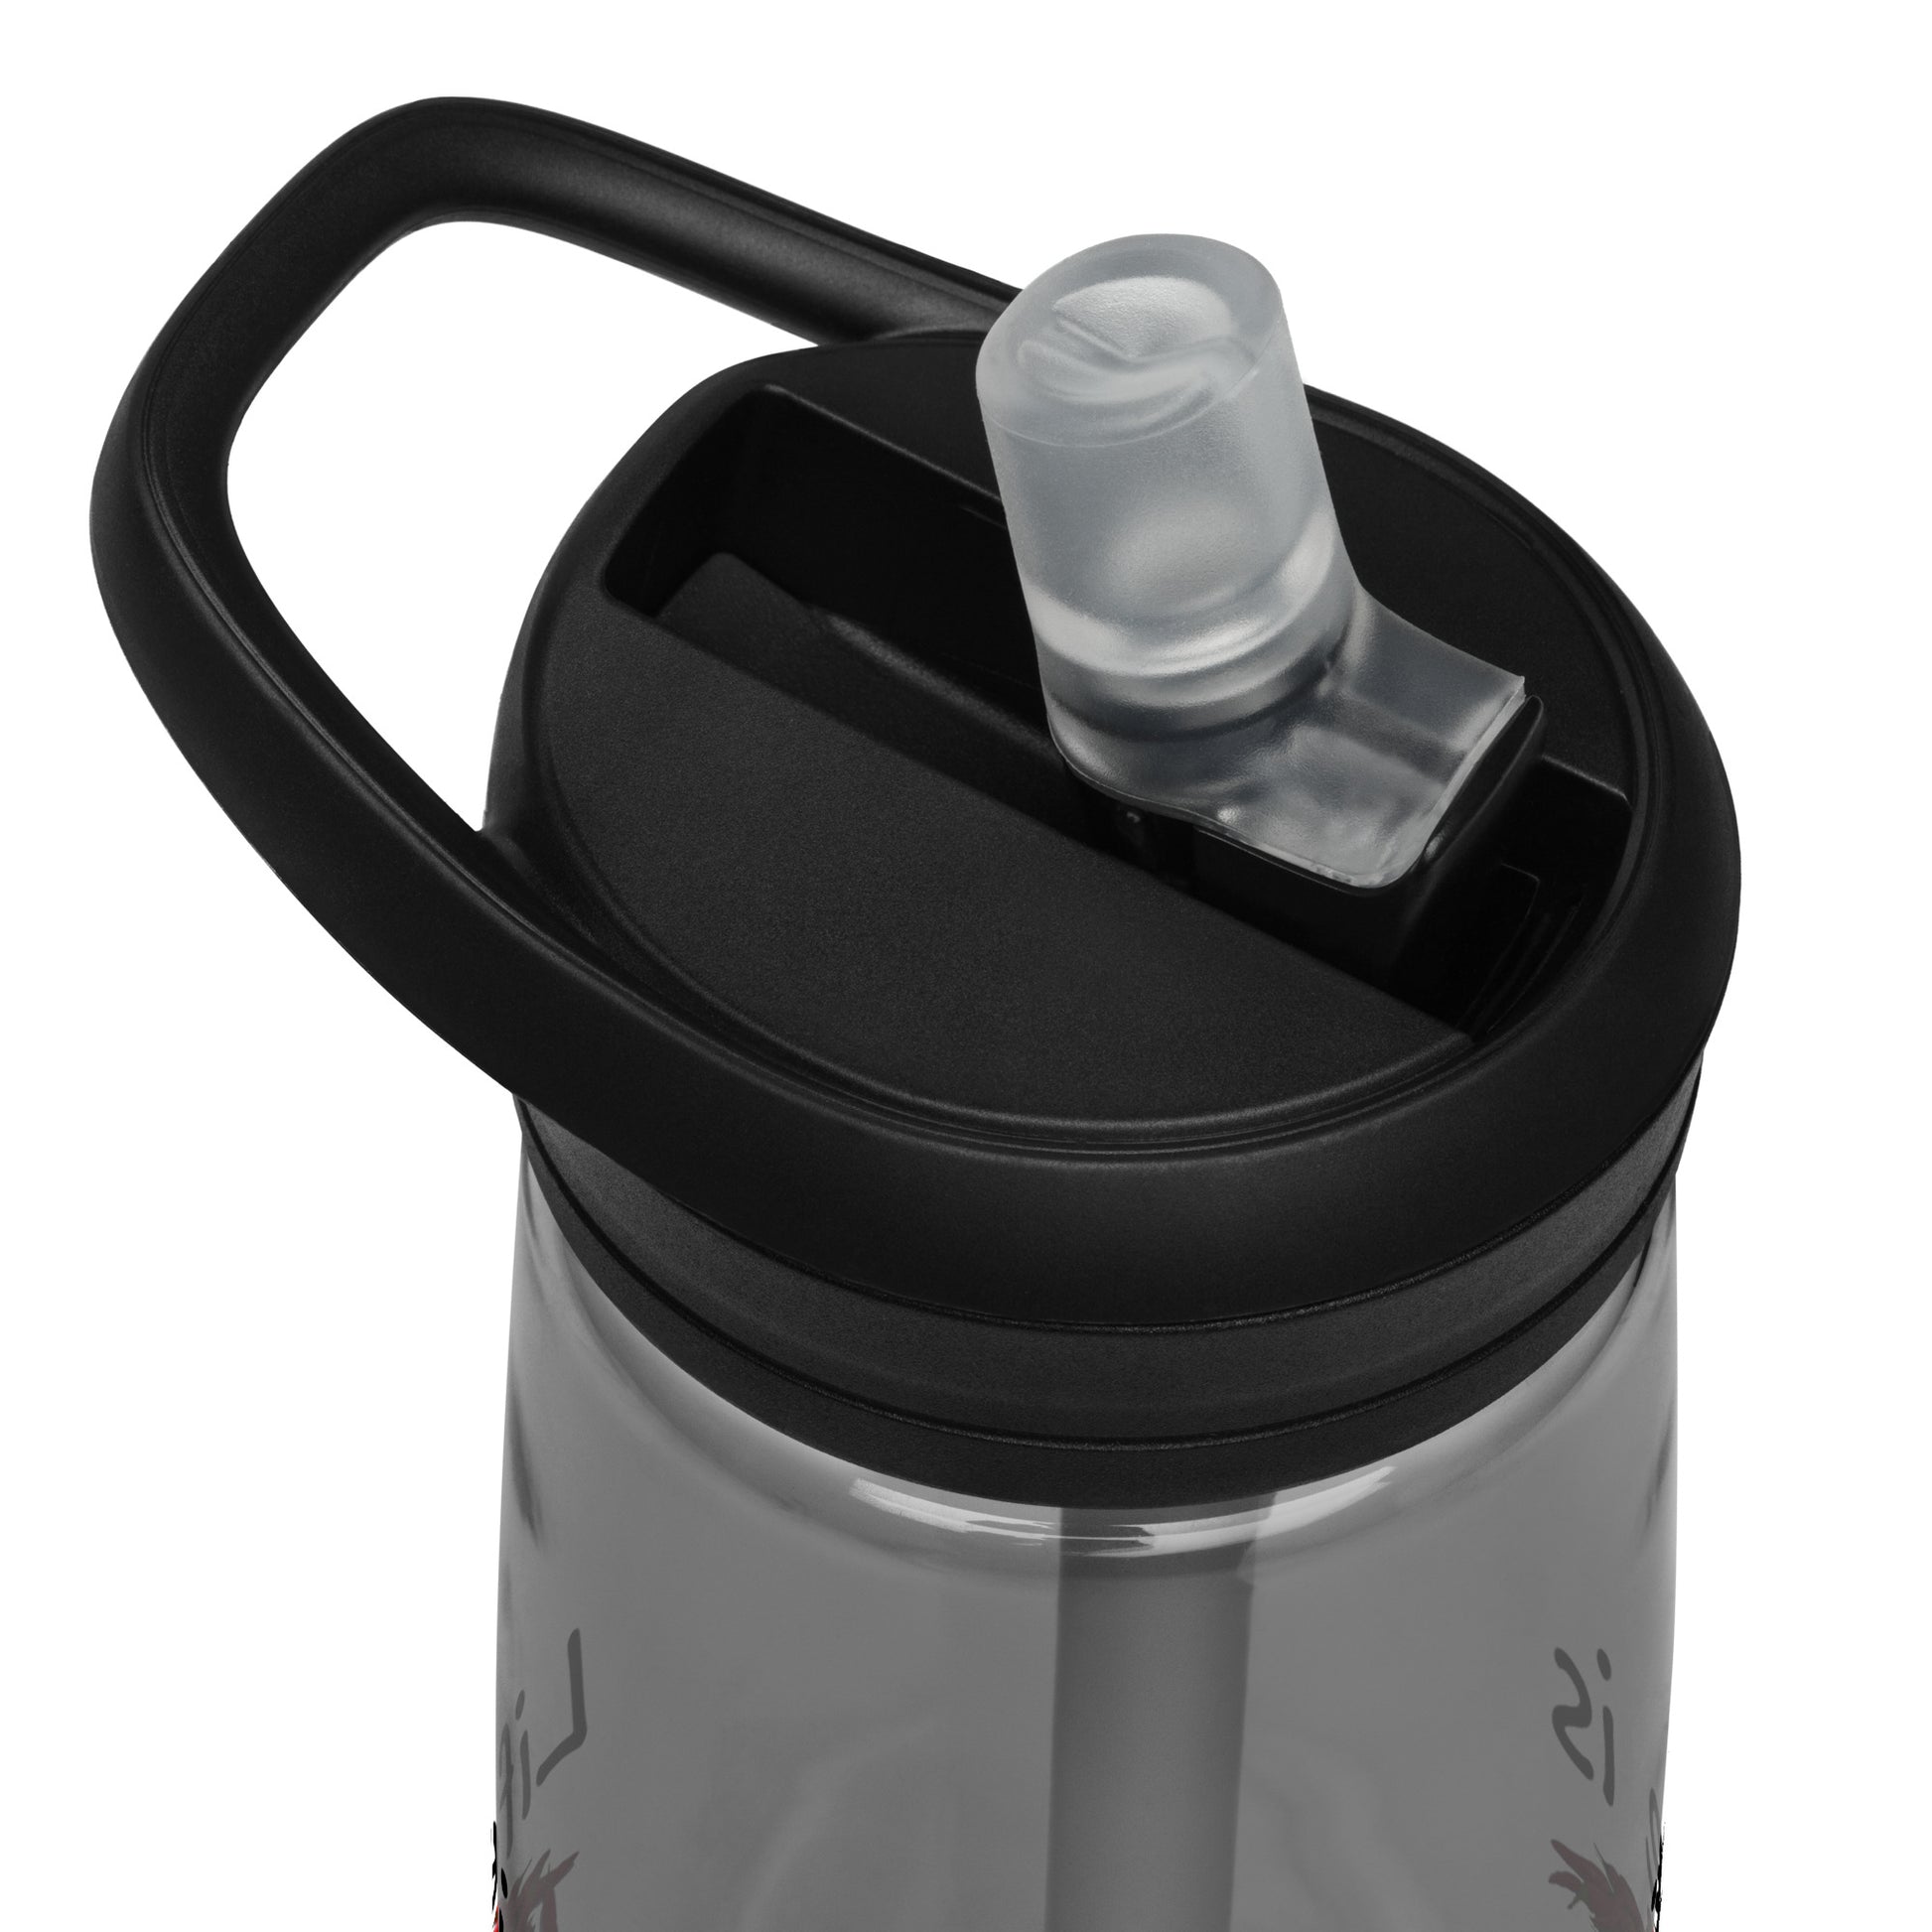 25 ounce sports water bottle with spill-proof lid and bite valve. Charcoal grey stain and odor-resistant BPA-free plastic. Features double-sided design of "Life is spicy. Dill with it" phrase with peppers and dill weed images. Detail view of bite valve and lid.